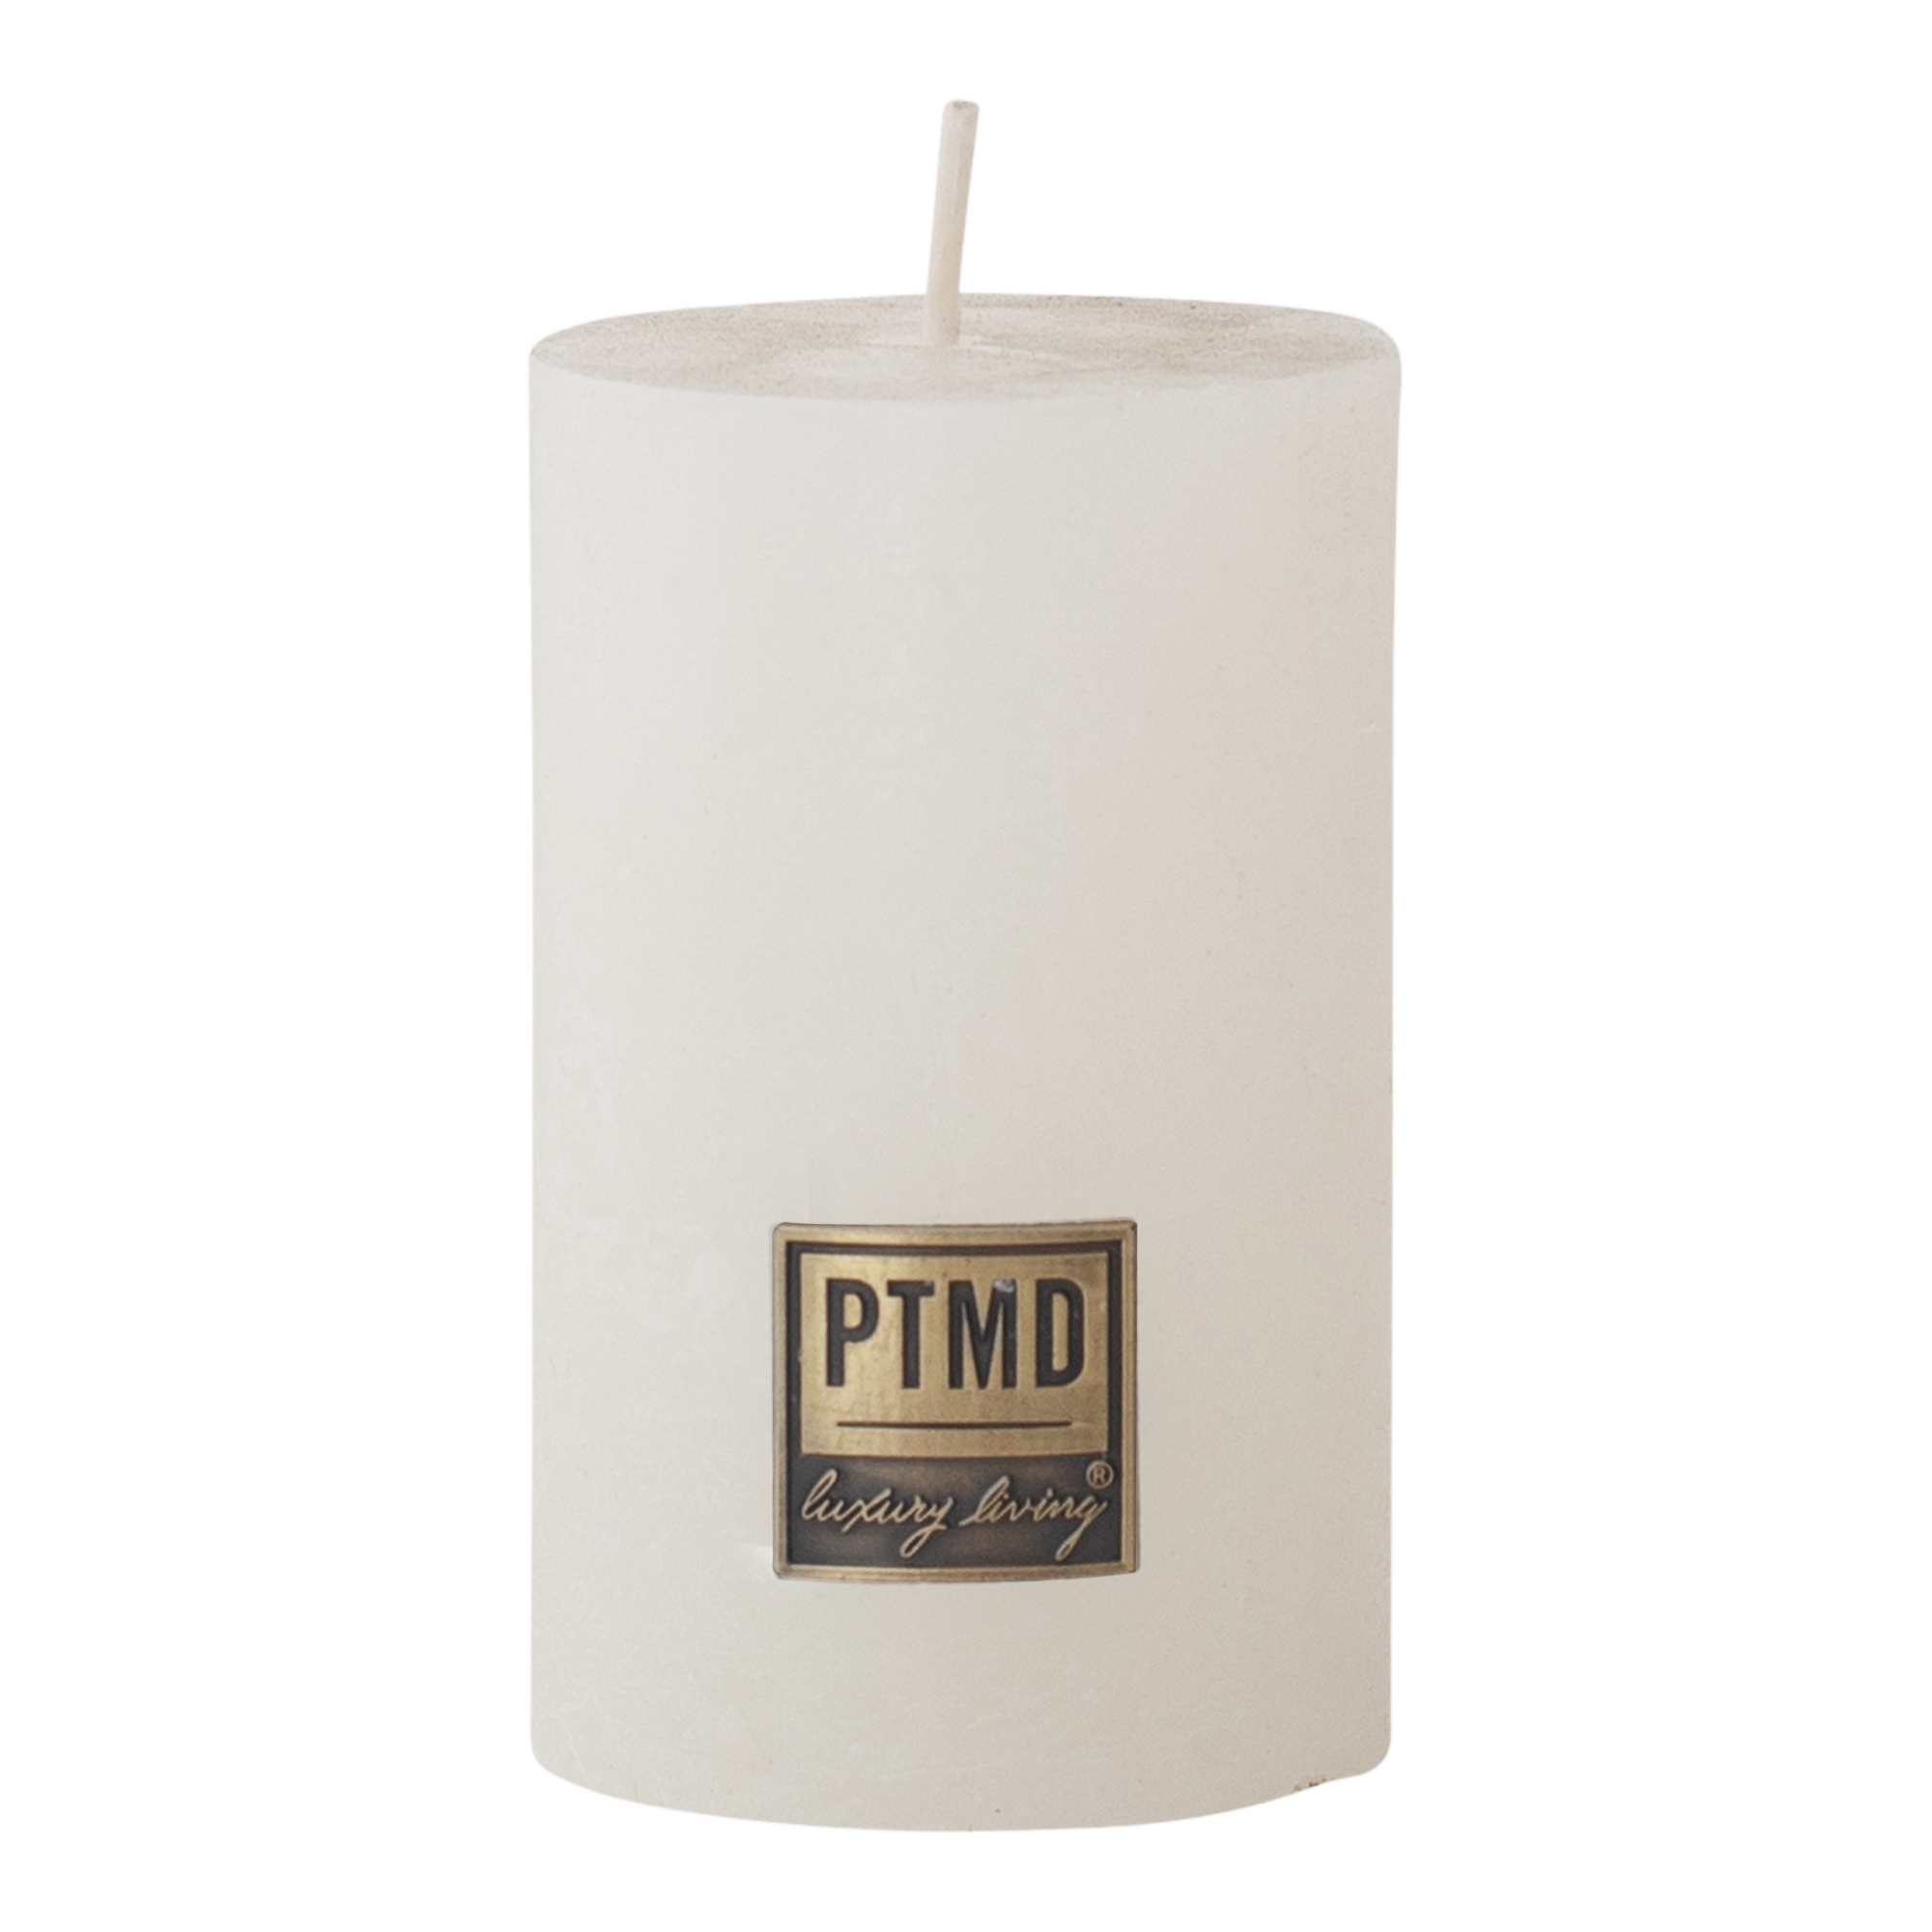 PTMD 8 x 5cm Rustic Hot White Pillar Candle